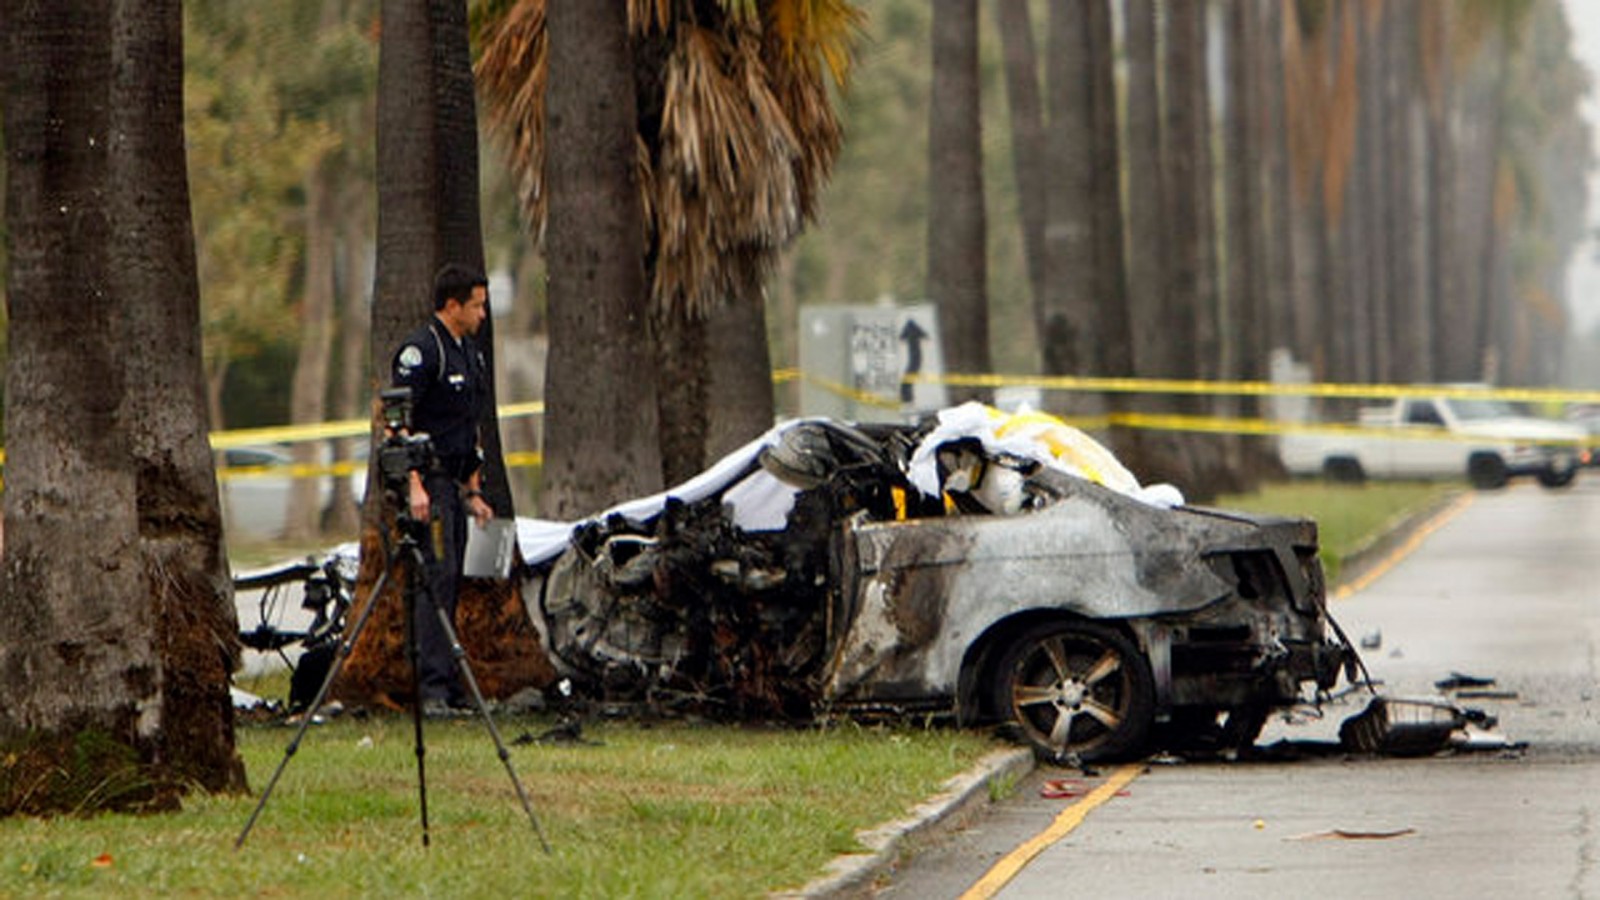 Exclusive: Who Killed Michael Hastings? | Occupy.com